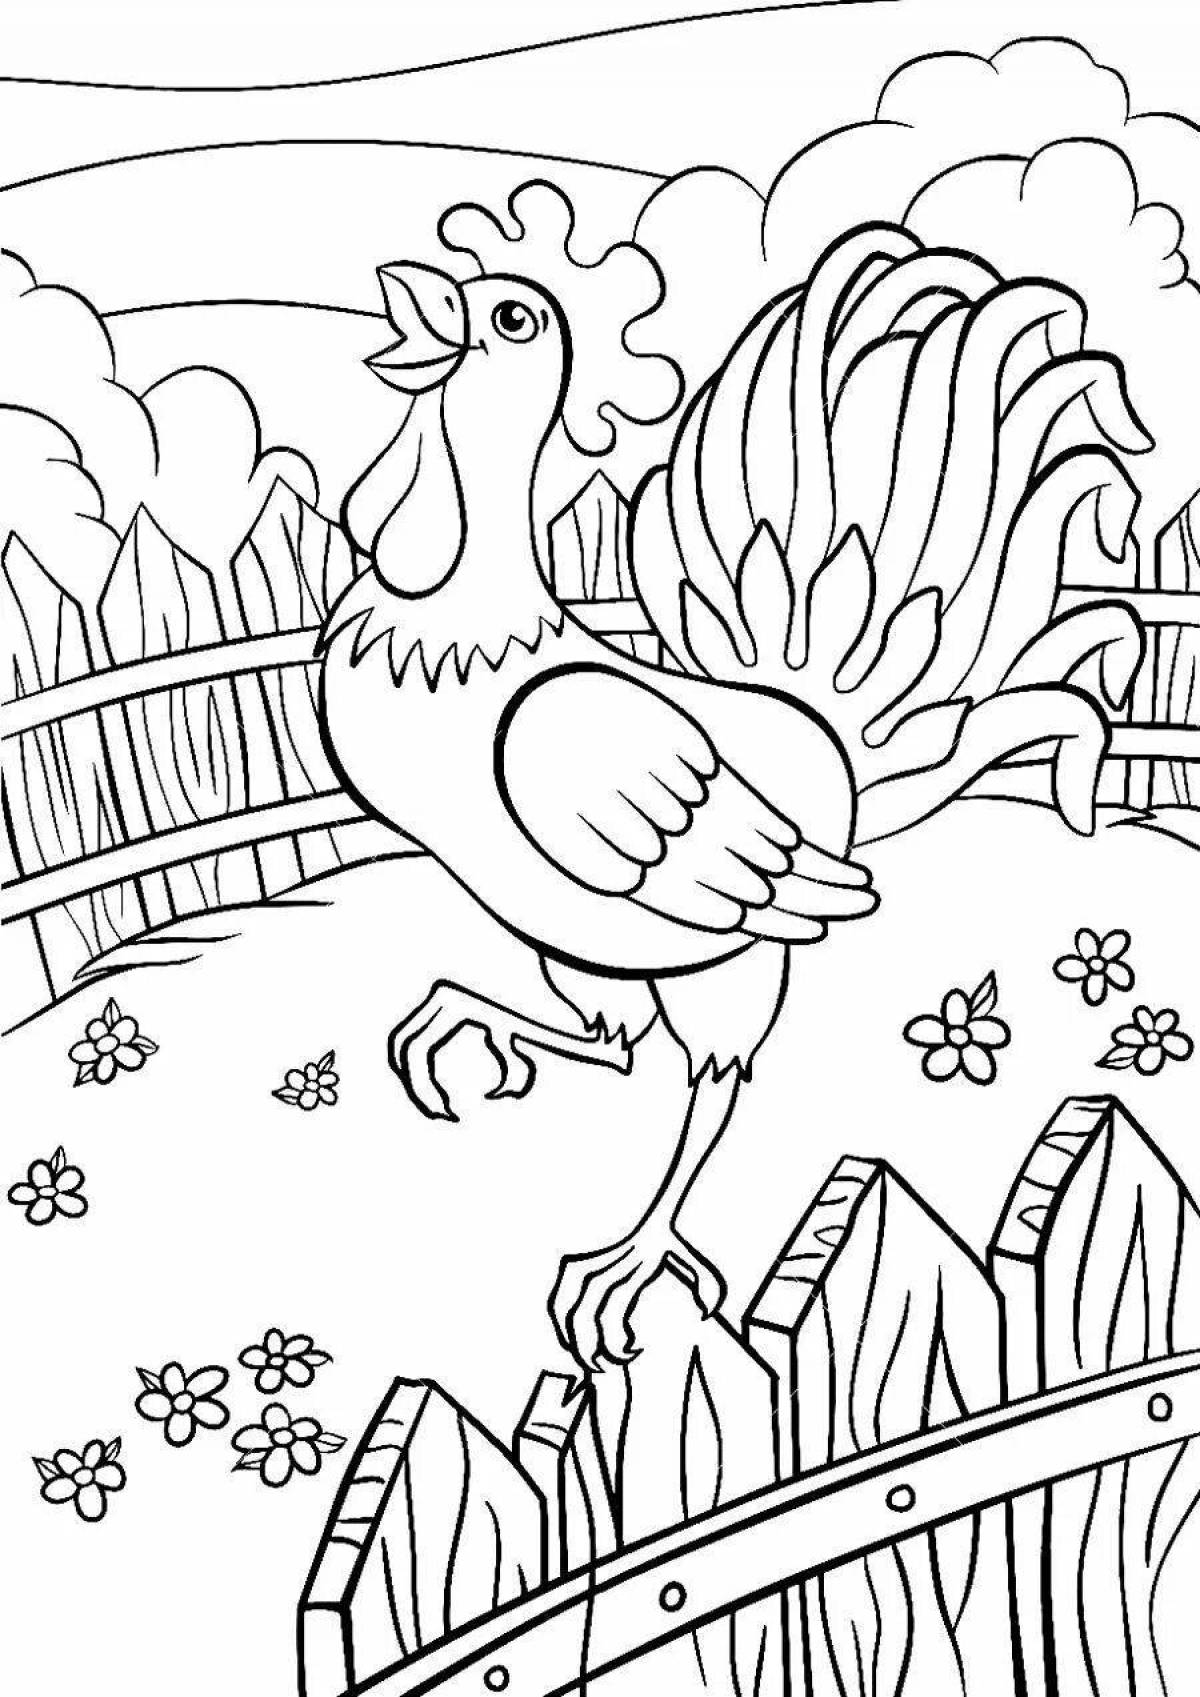 Big golden rooster coloring book